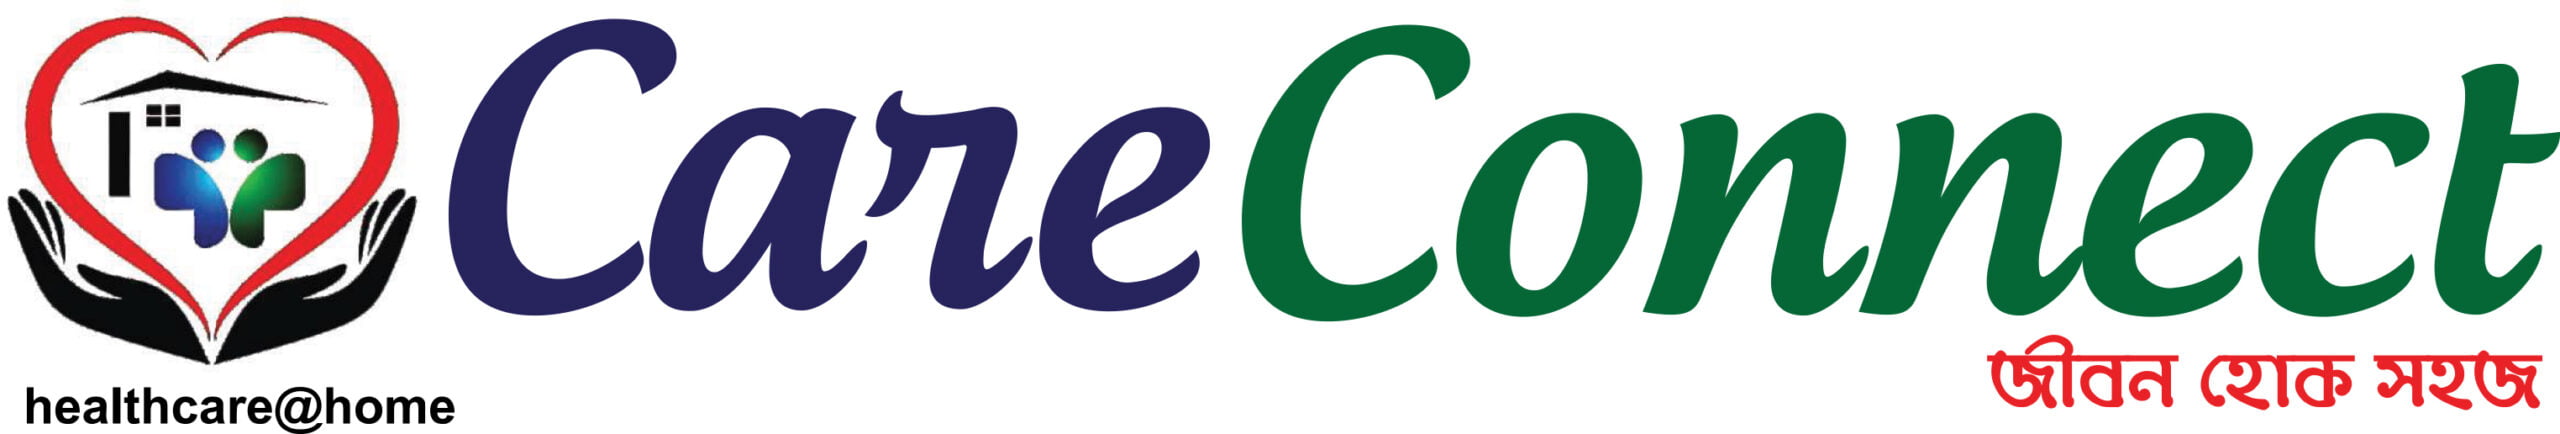 CARE CONNECT LOGO